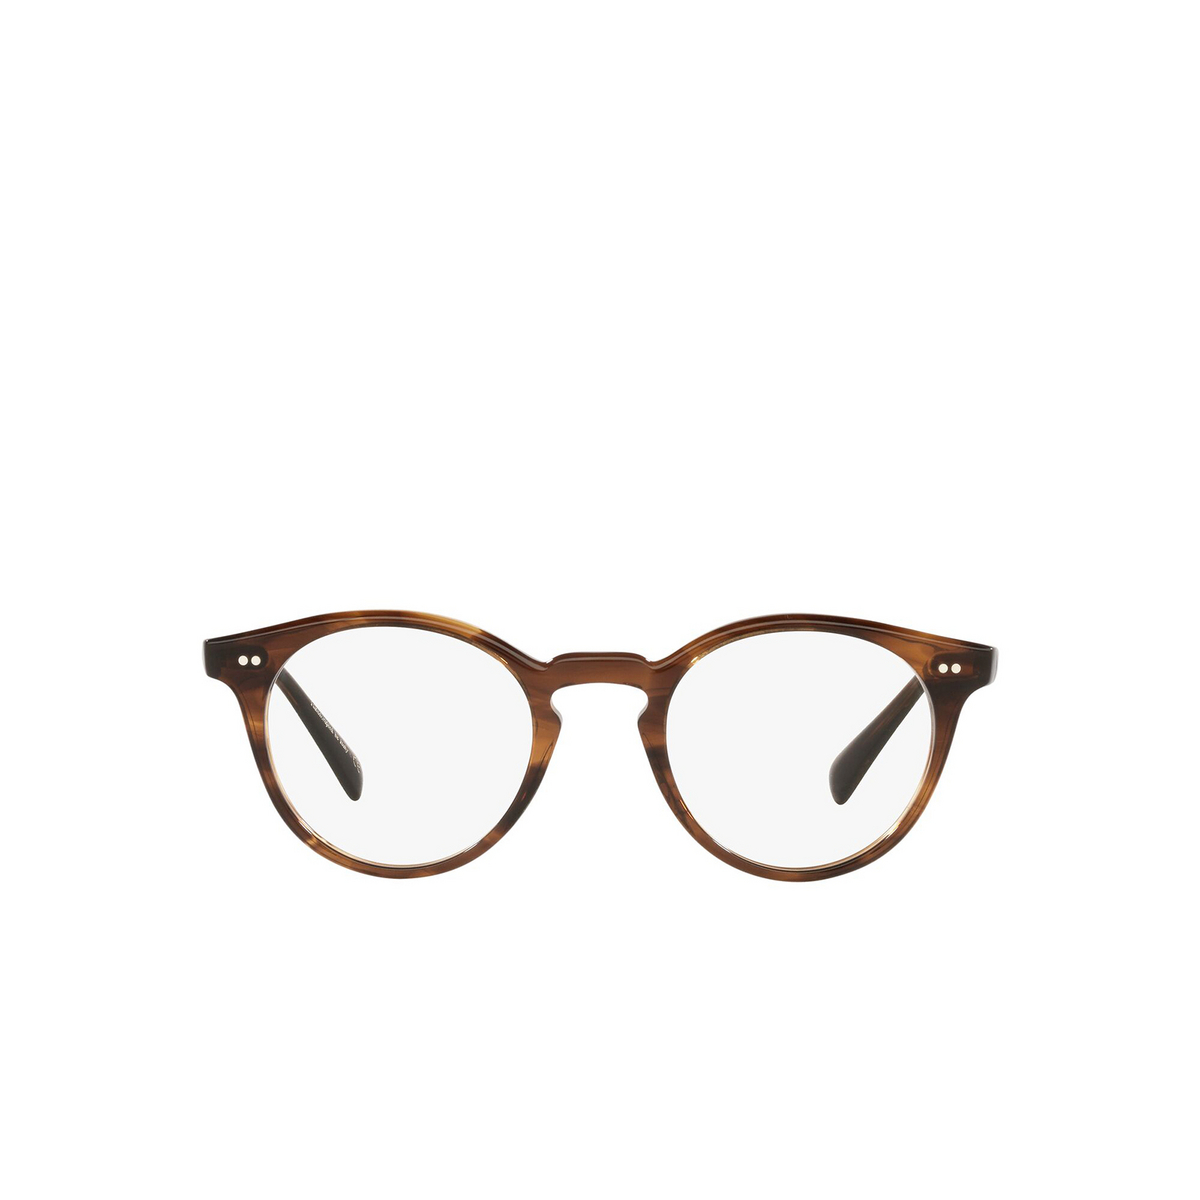 Oliver Peoples ROMARE Eyeglasses 1724 Tuscany Tortoise - front view